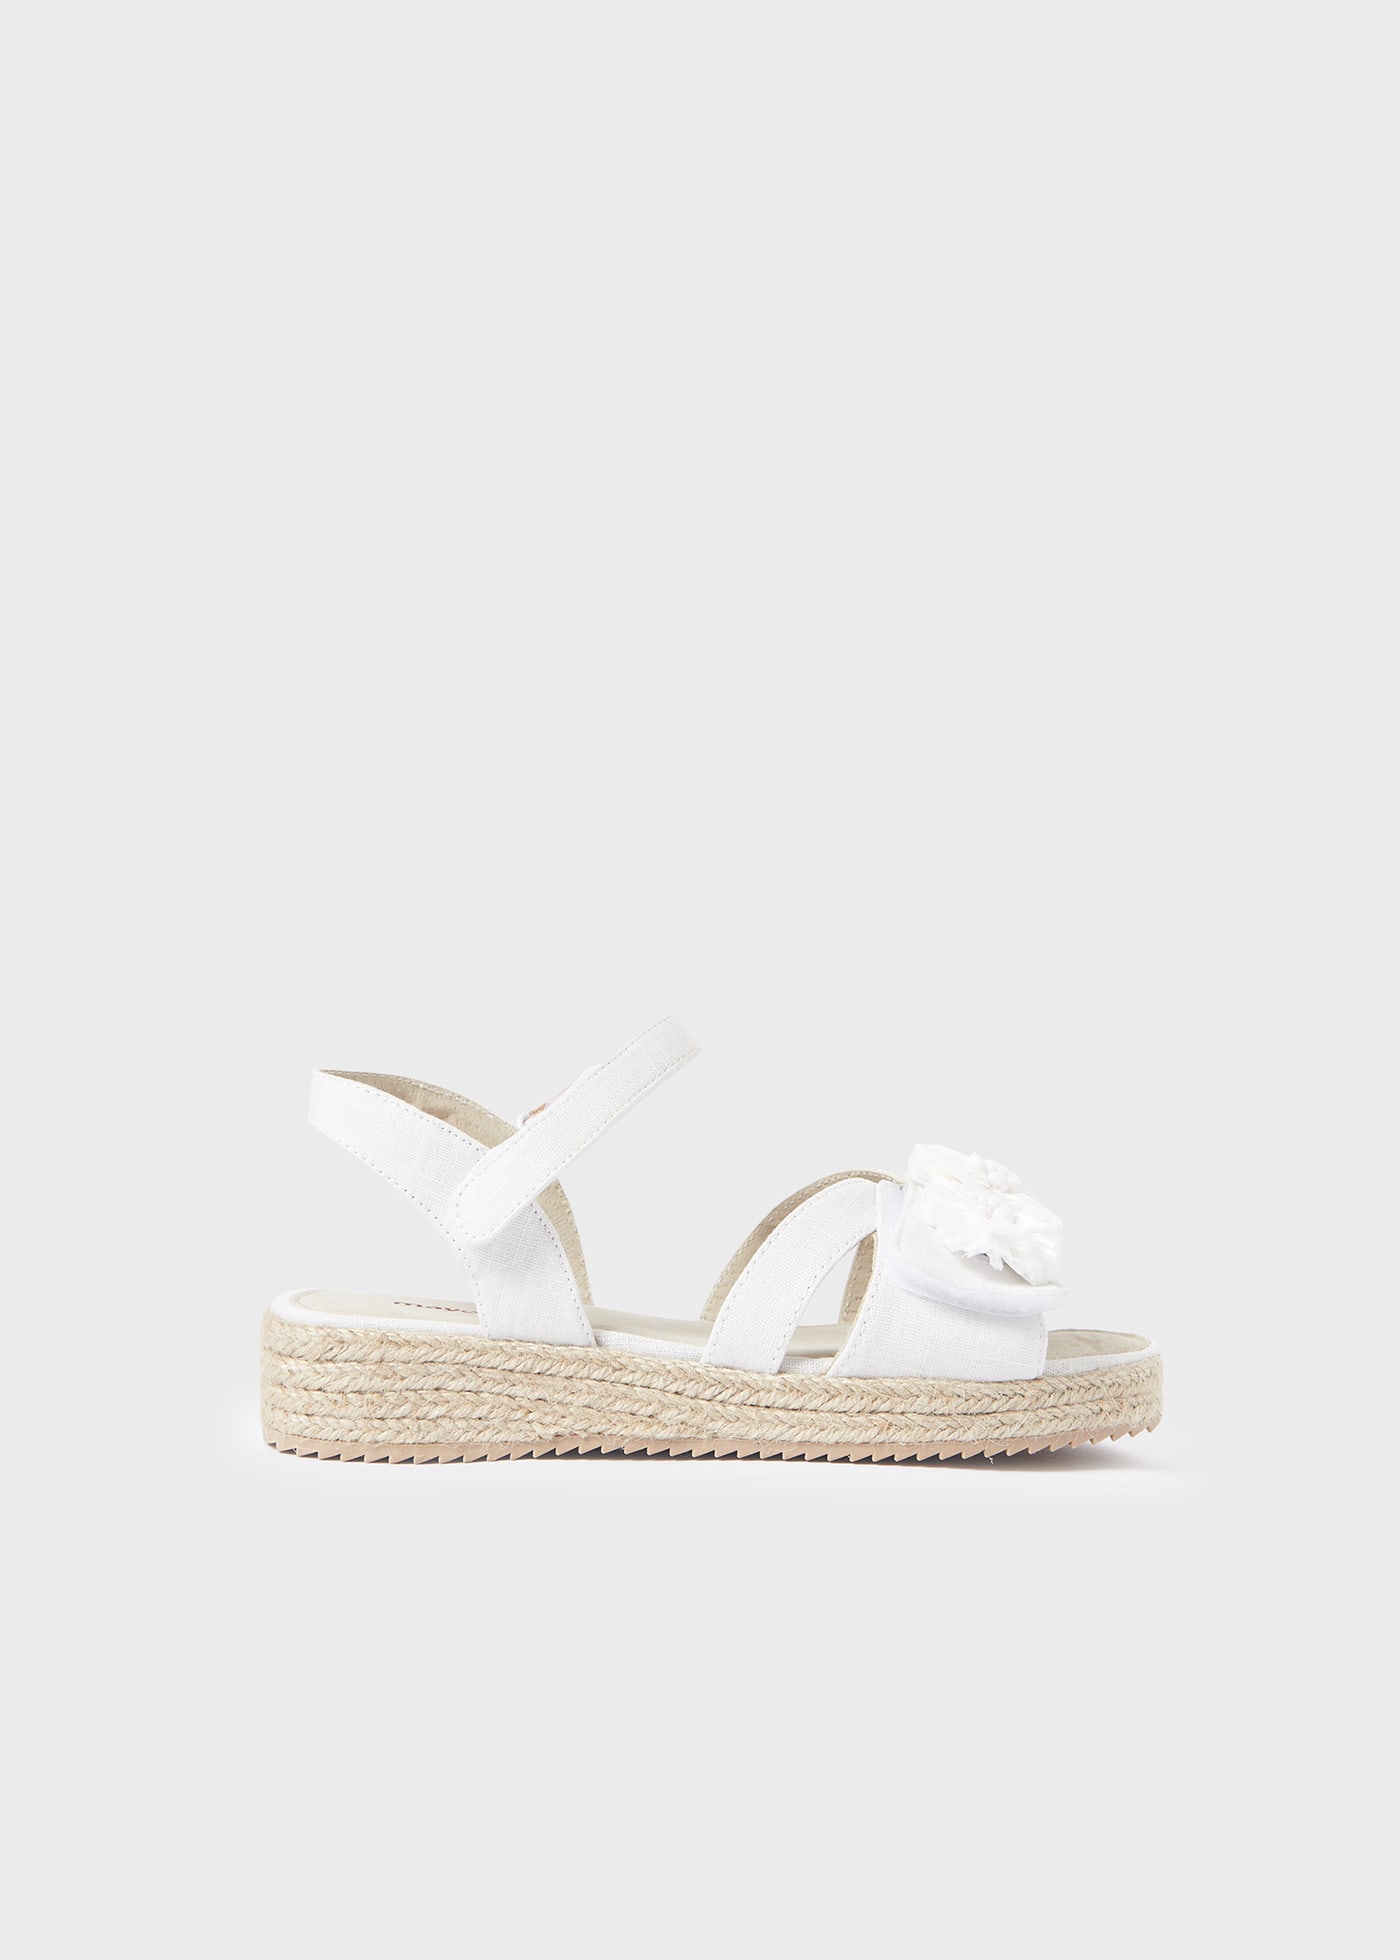 Espadrille sandals with floral motif girl